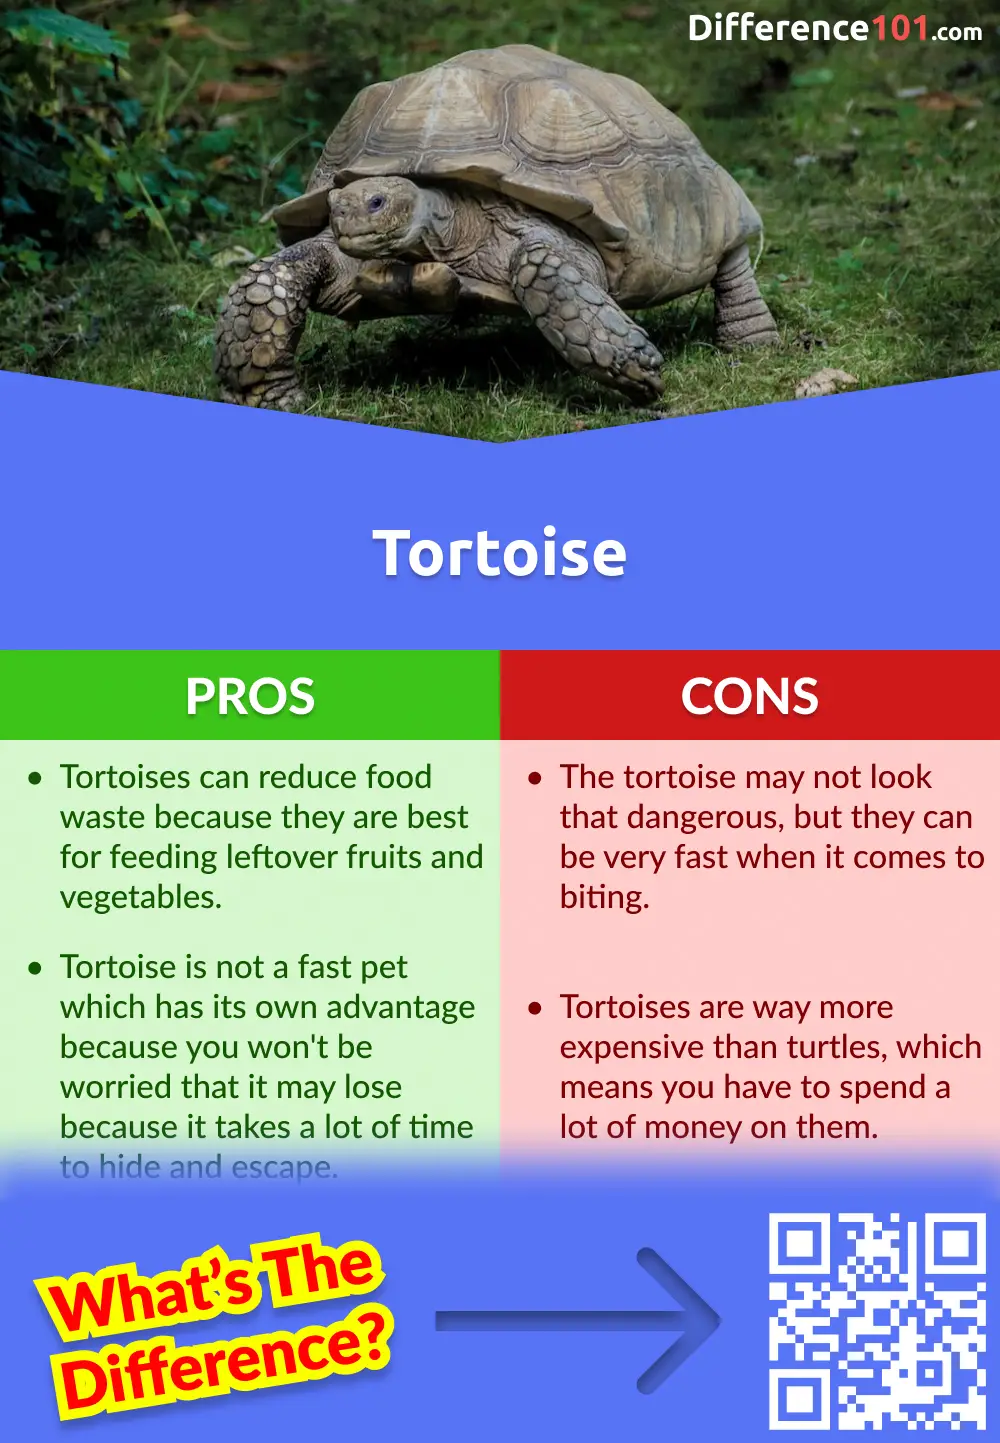 Tortoise Pros and Cons